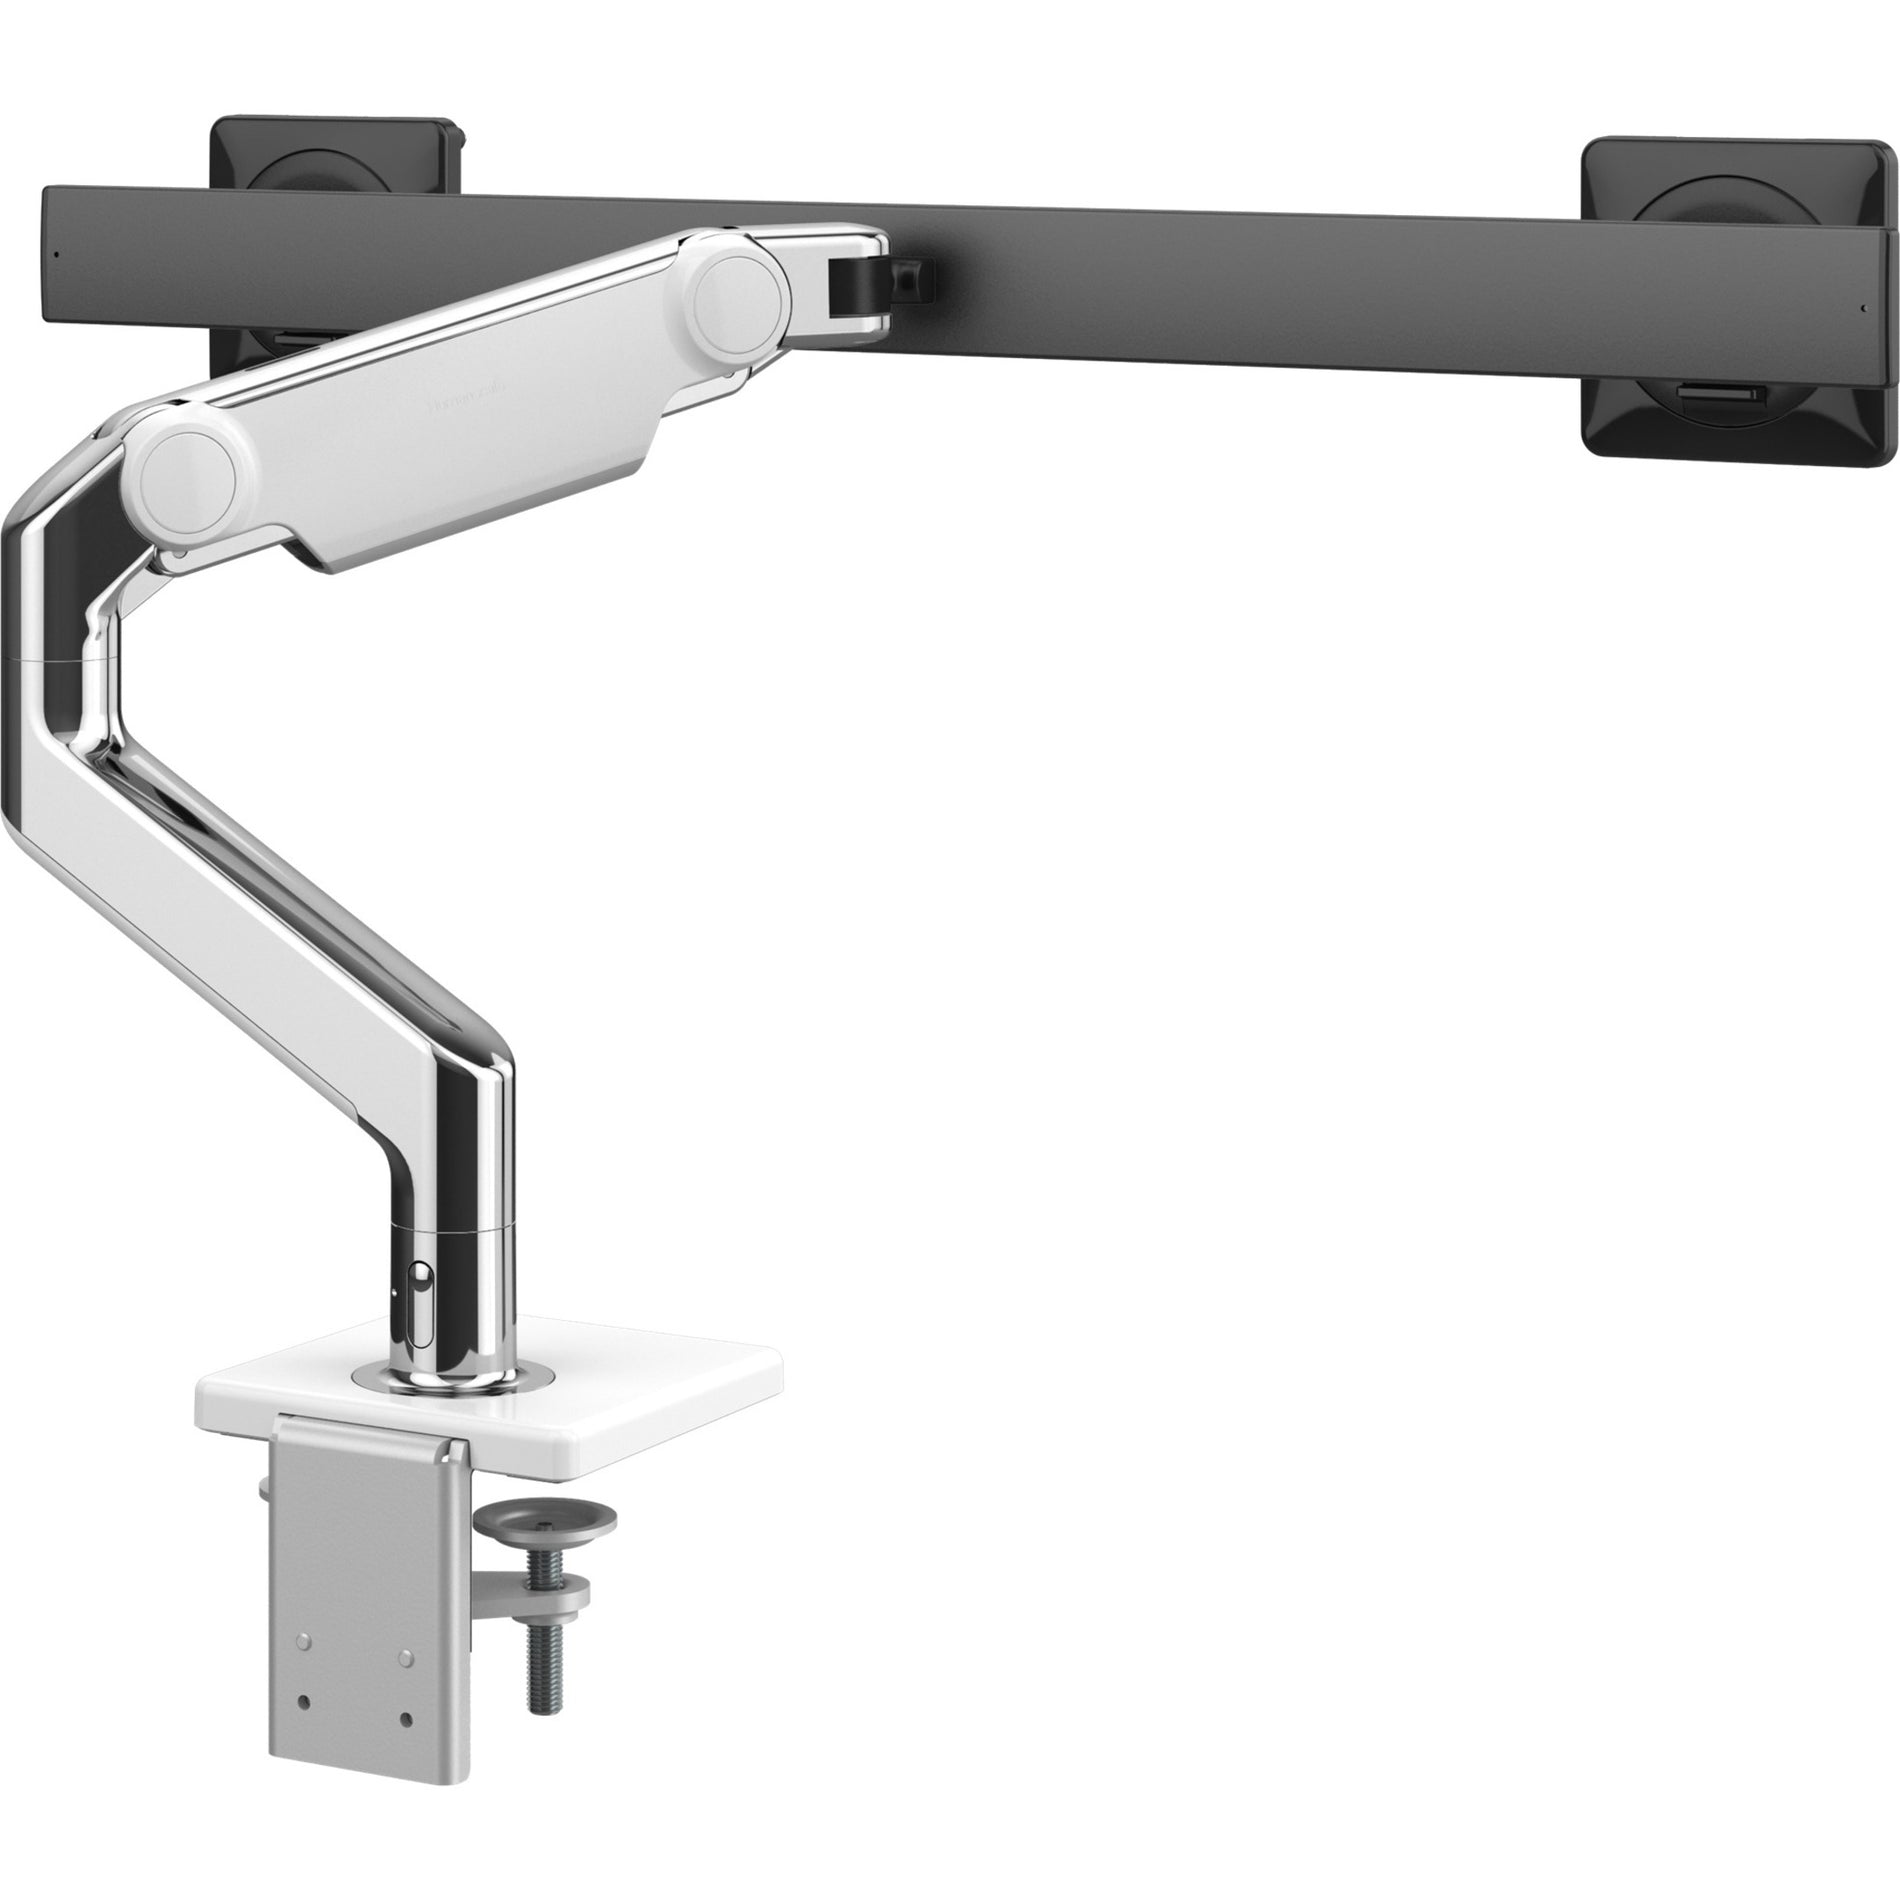 Humanscale M81CMWB2B M8.1 Monitor Arm, Cable Management, Rotate, Quick Release Mechanism, Durable, Robust, Angled/Dynamic Link